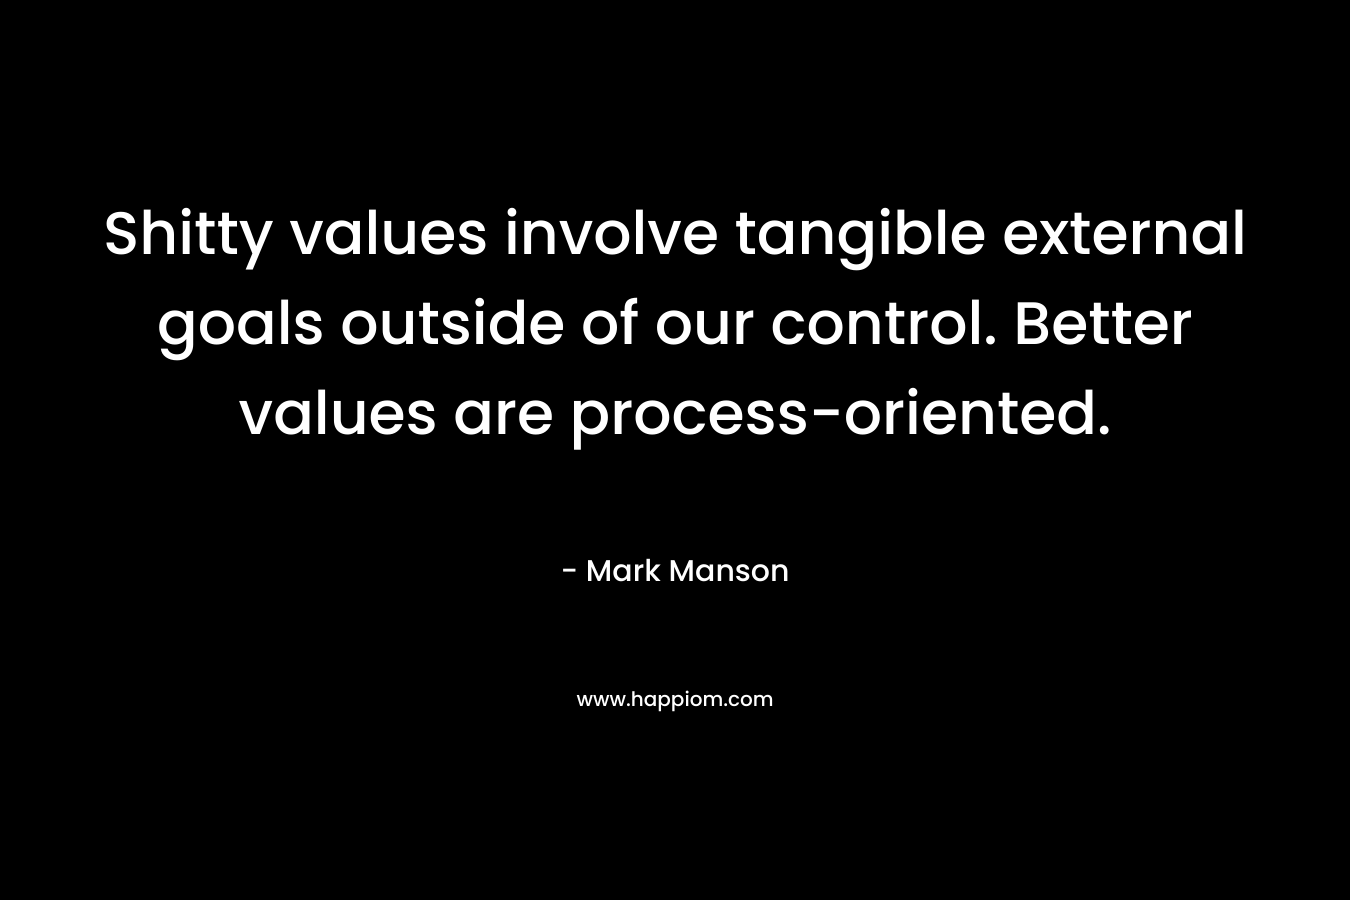 Shitty values involve tangible external goals outside of our control. Better values are process-oriented. – Mark Manson